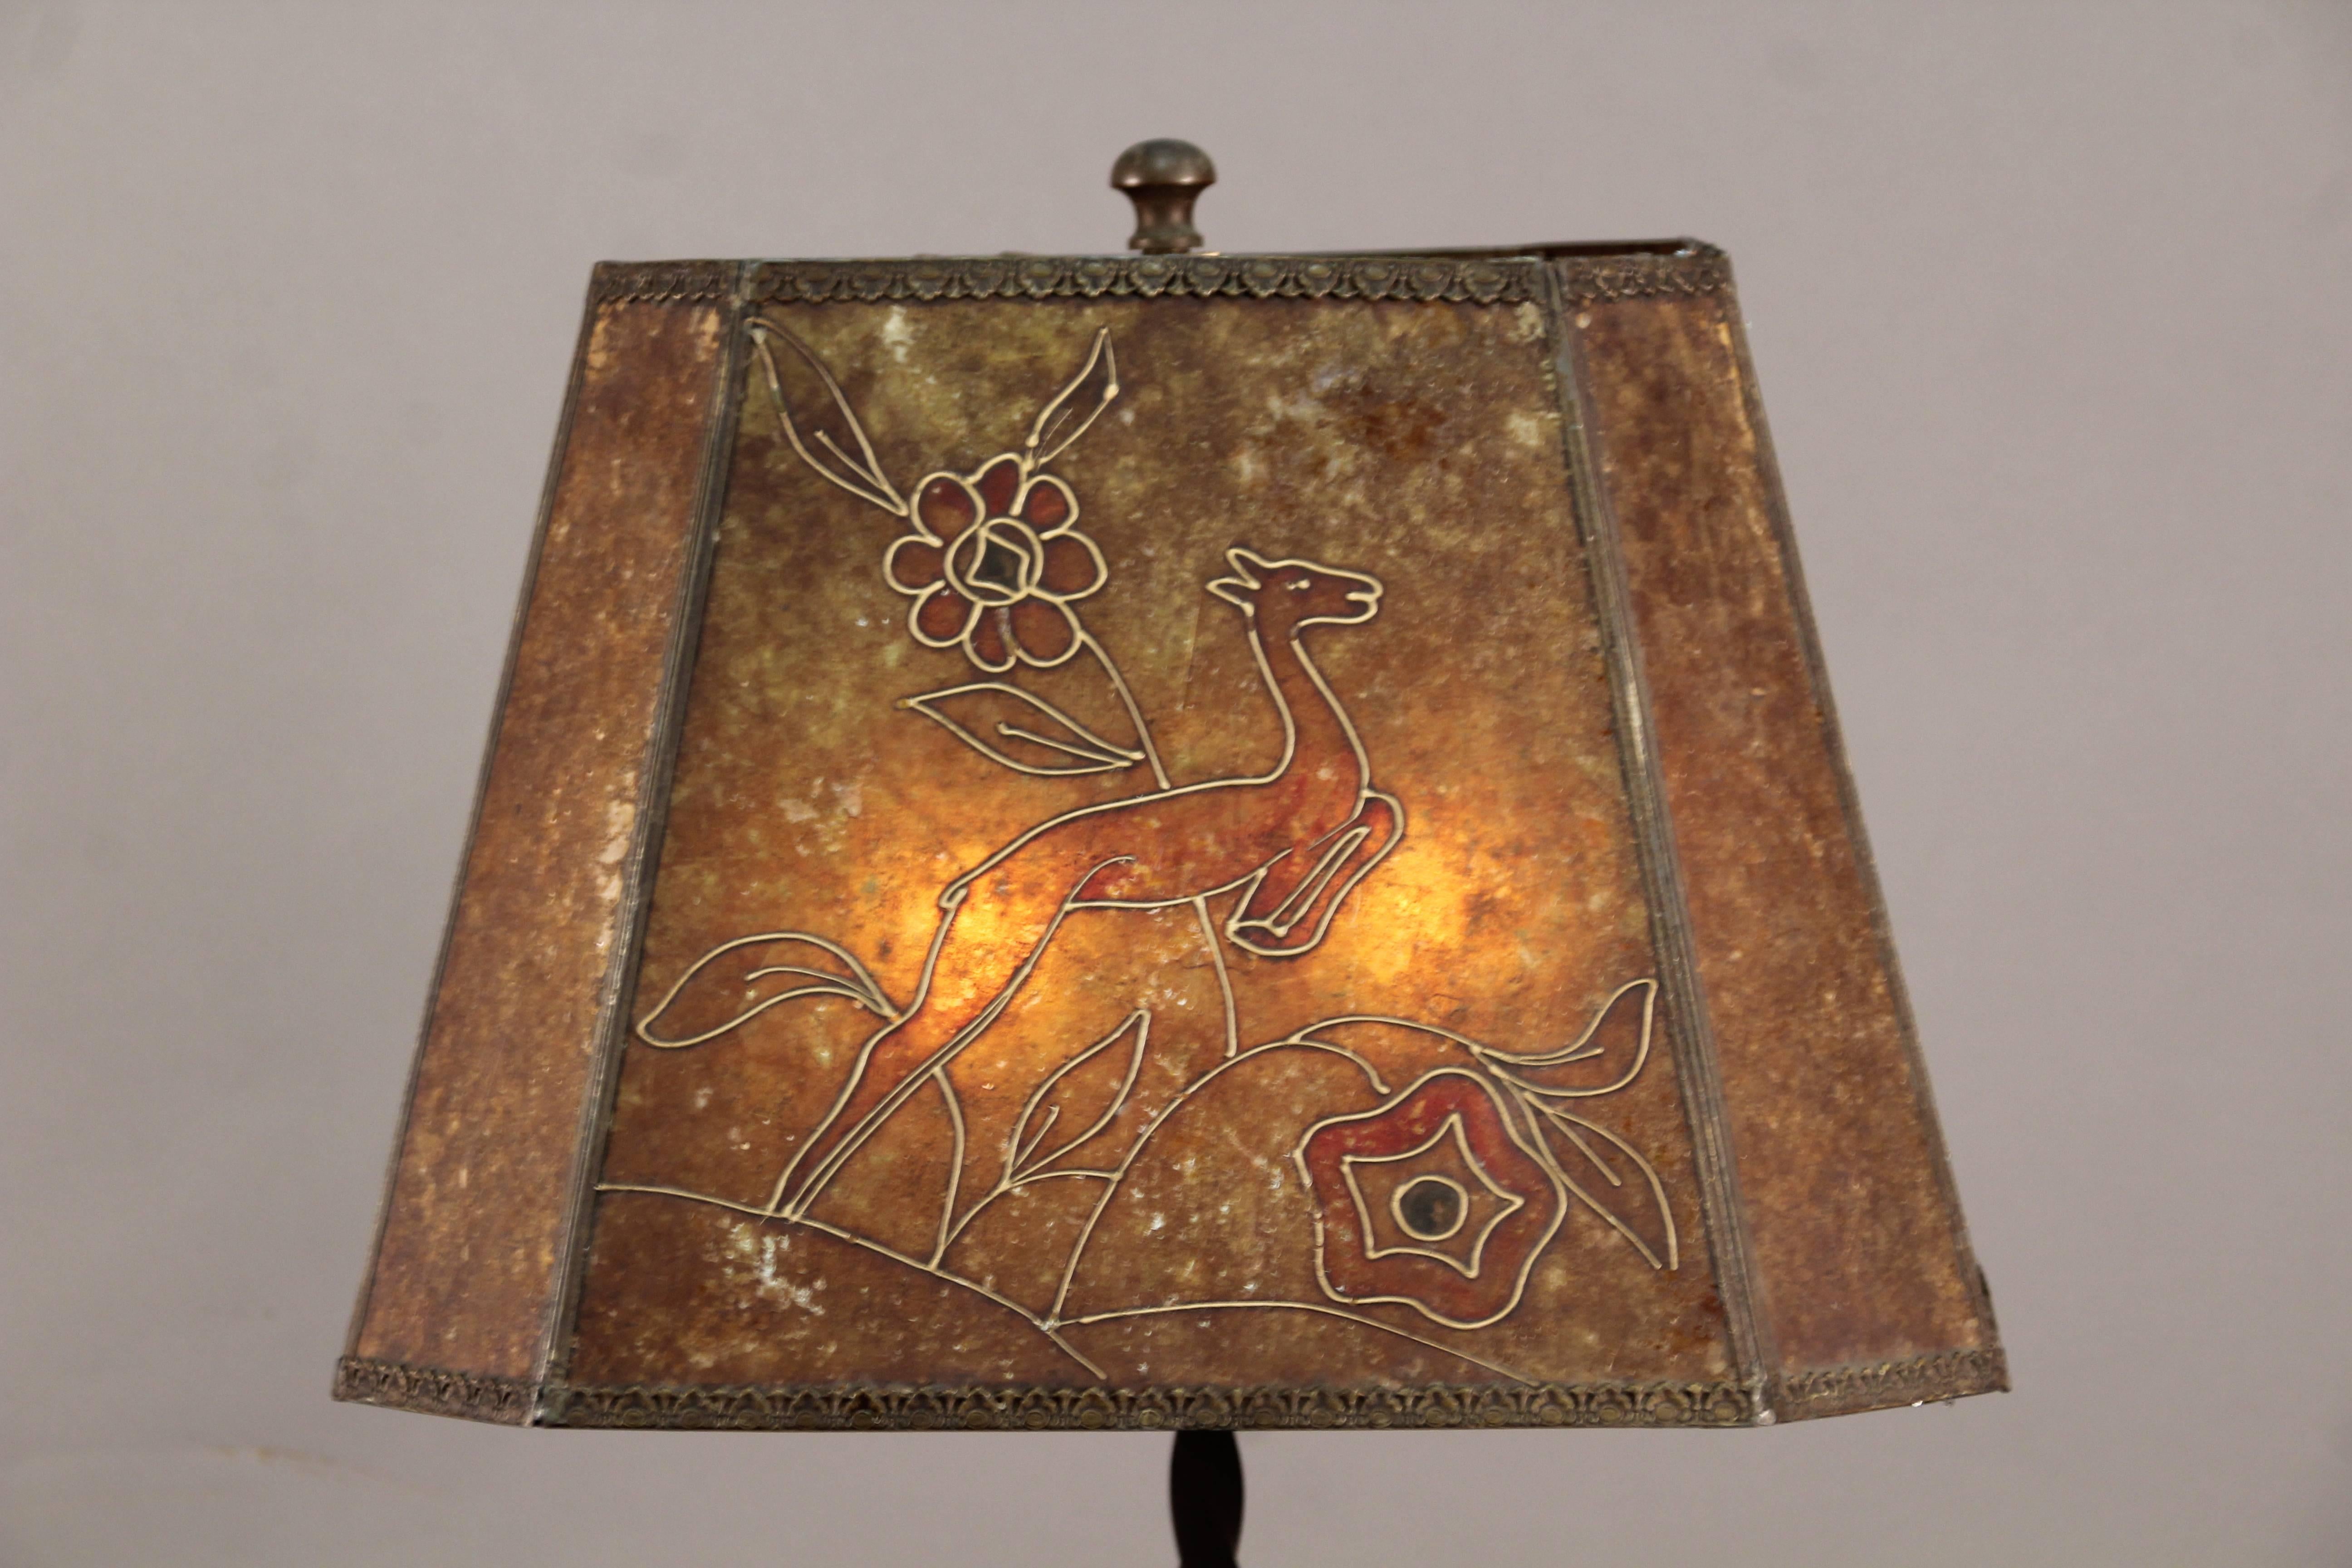 Floor lamp with wrought iron base eight sided mica shade, circa 1920s.